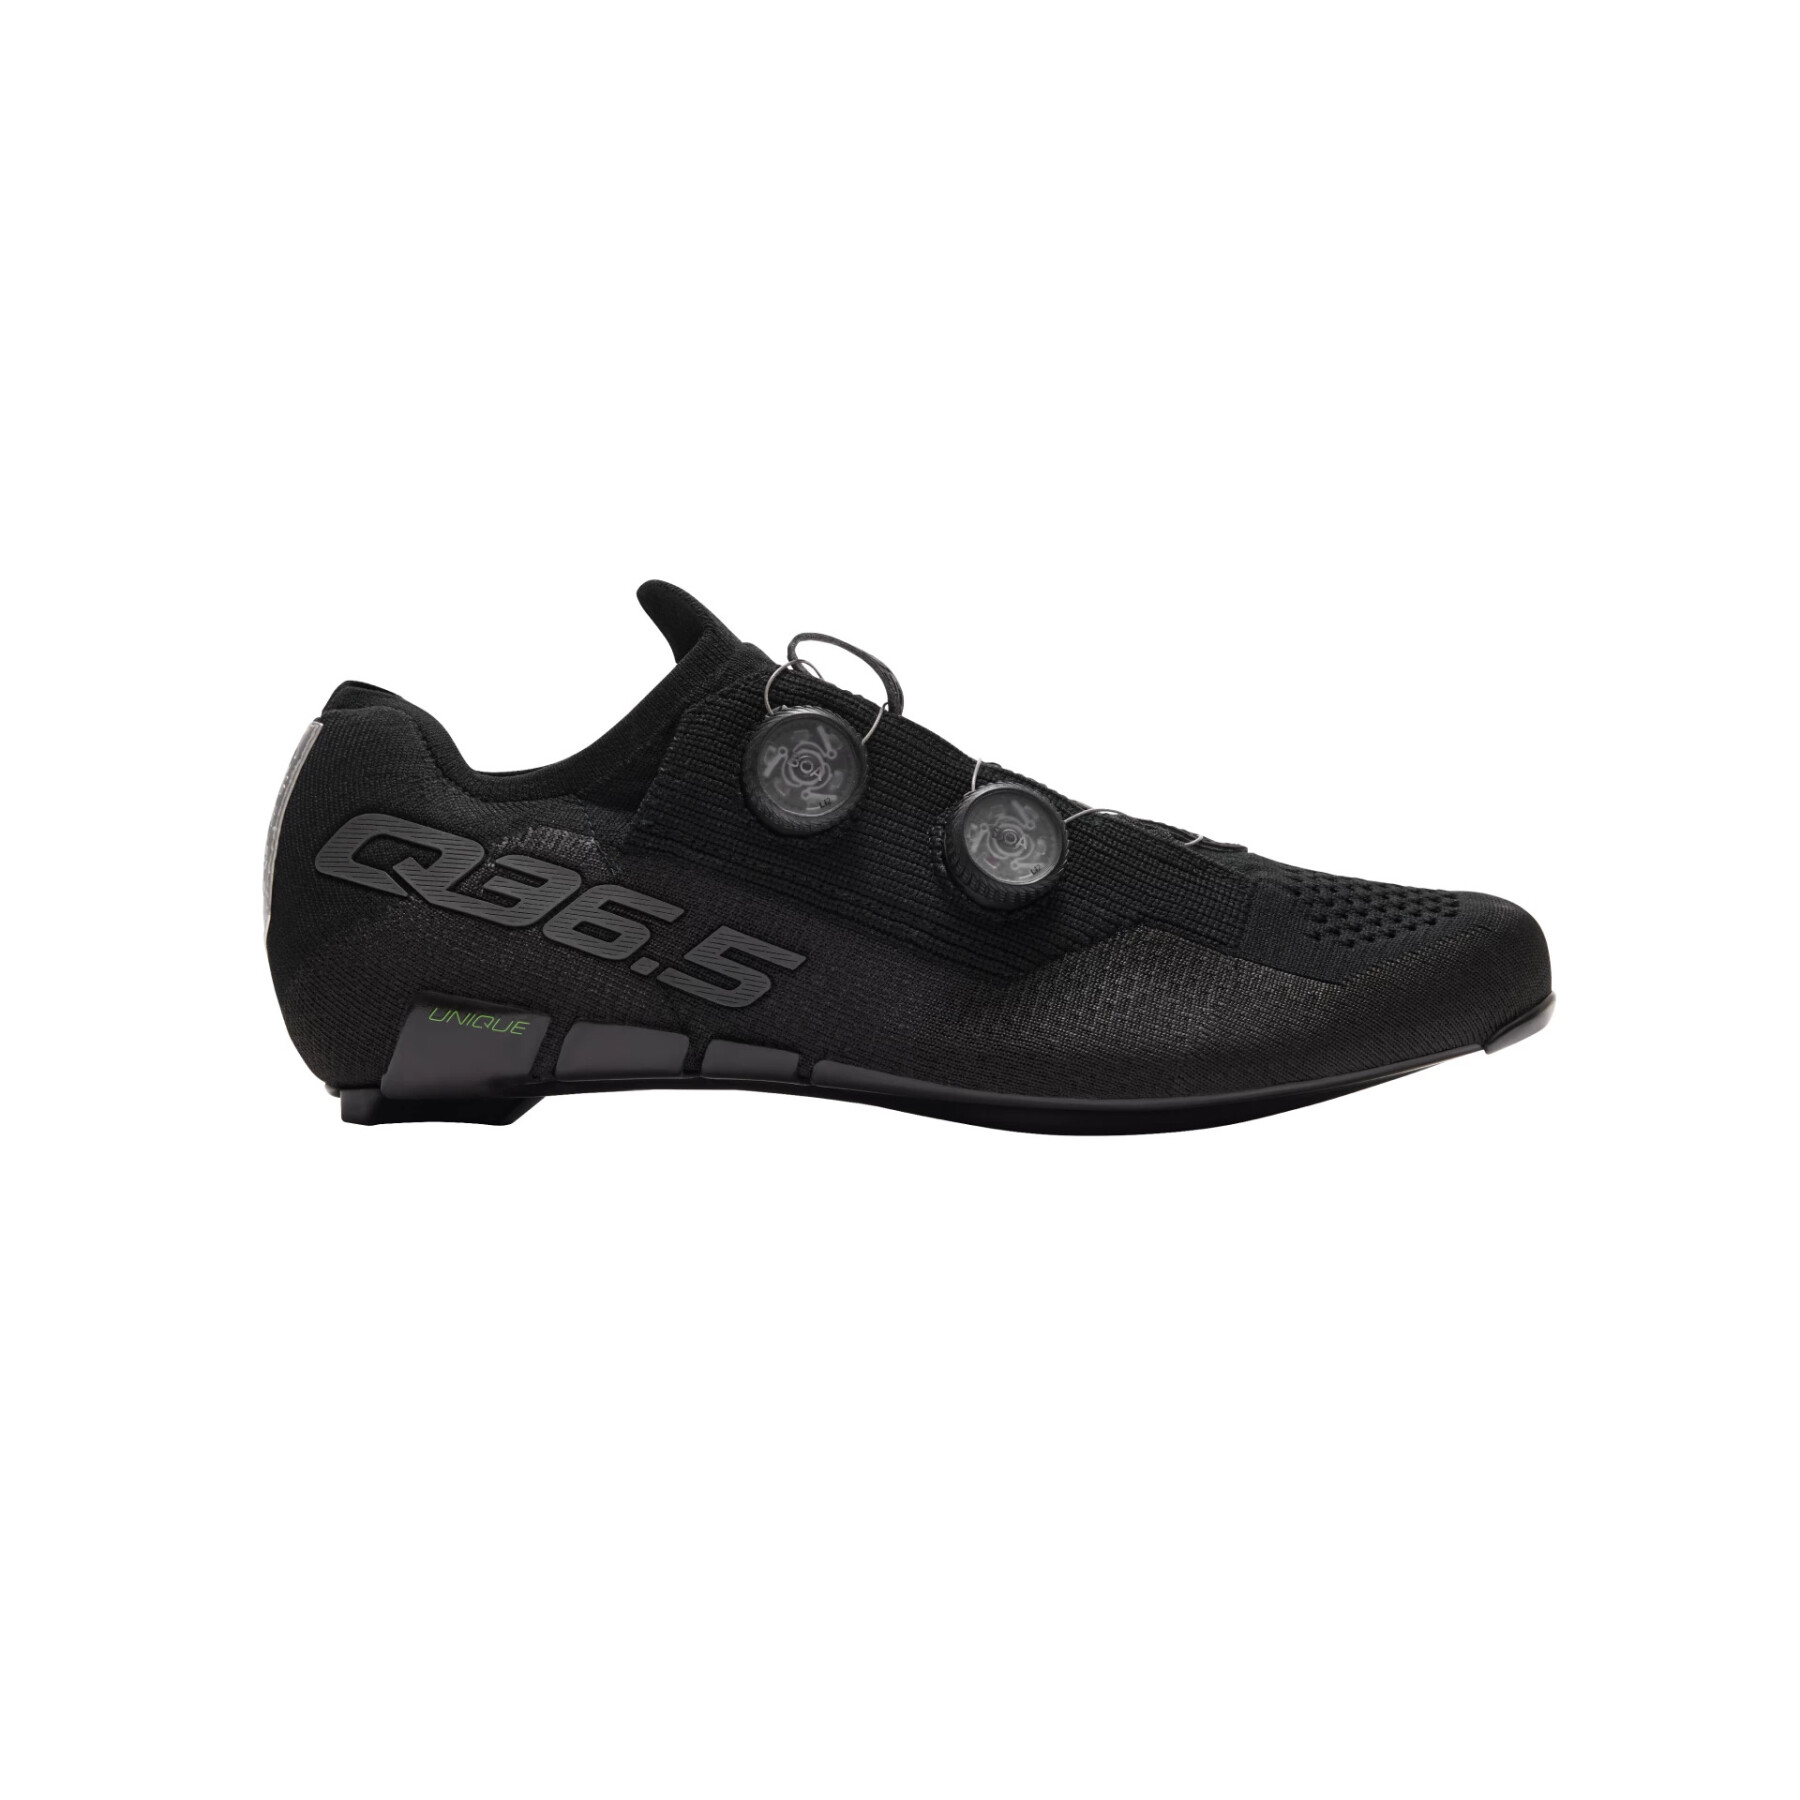 Chaussures Q36.5 Dottore Clima